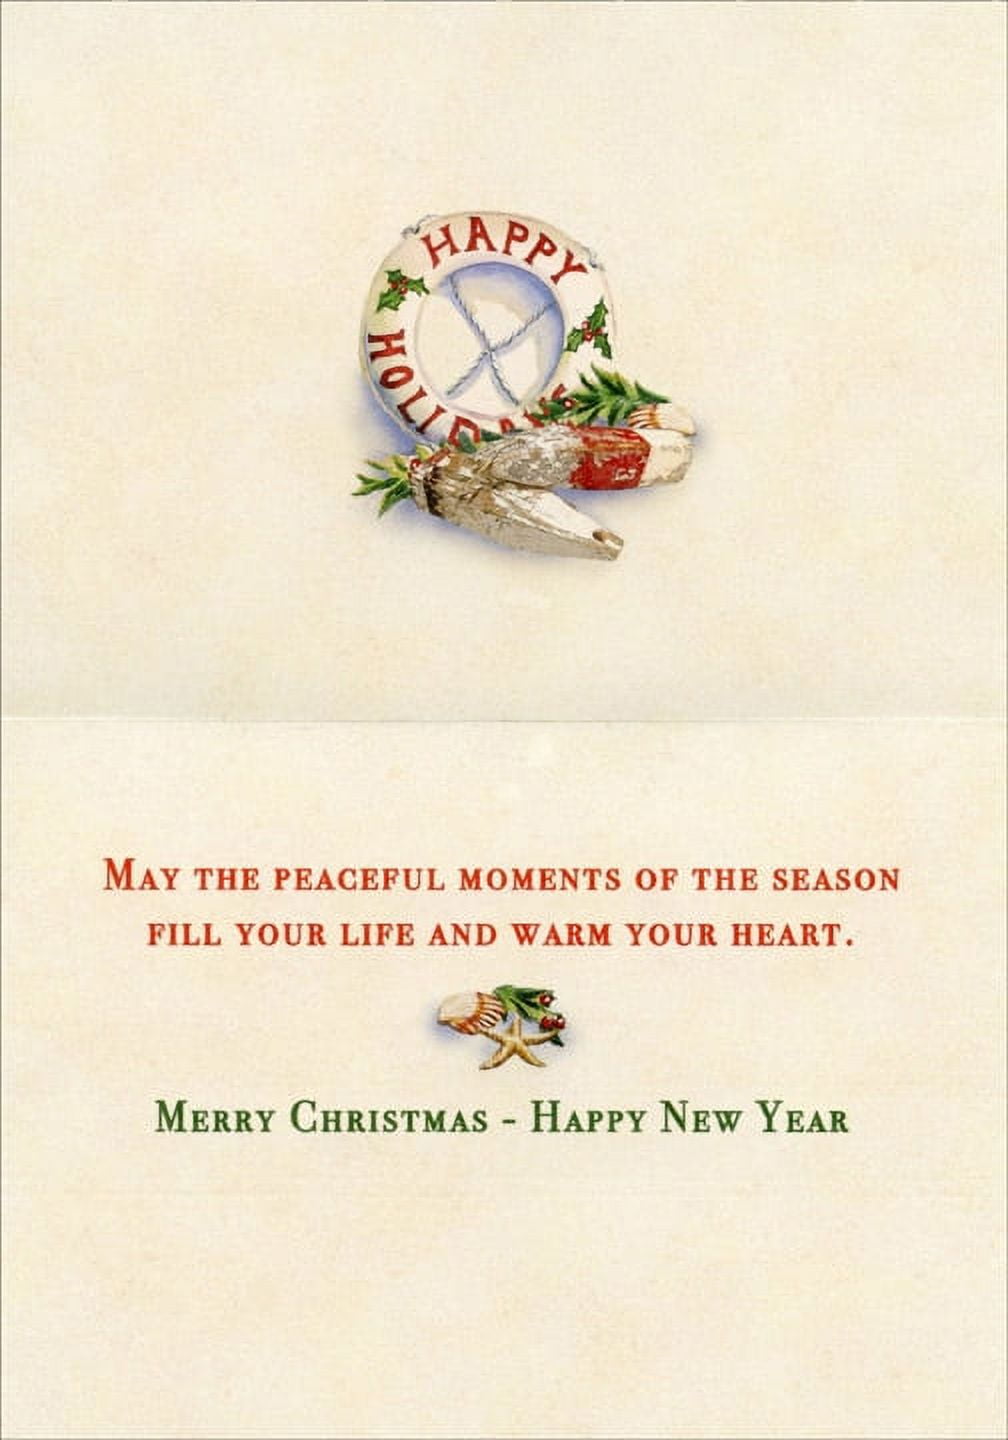 Vintage holiday cards will warm your heart